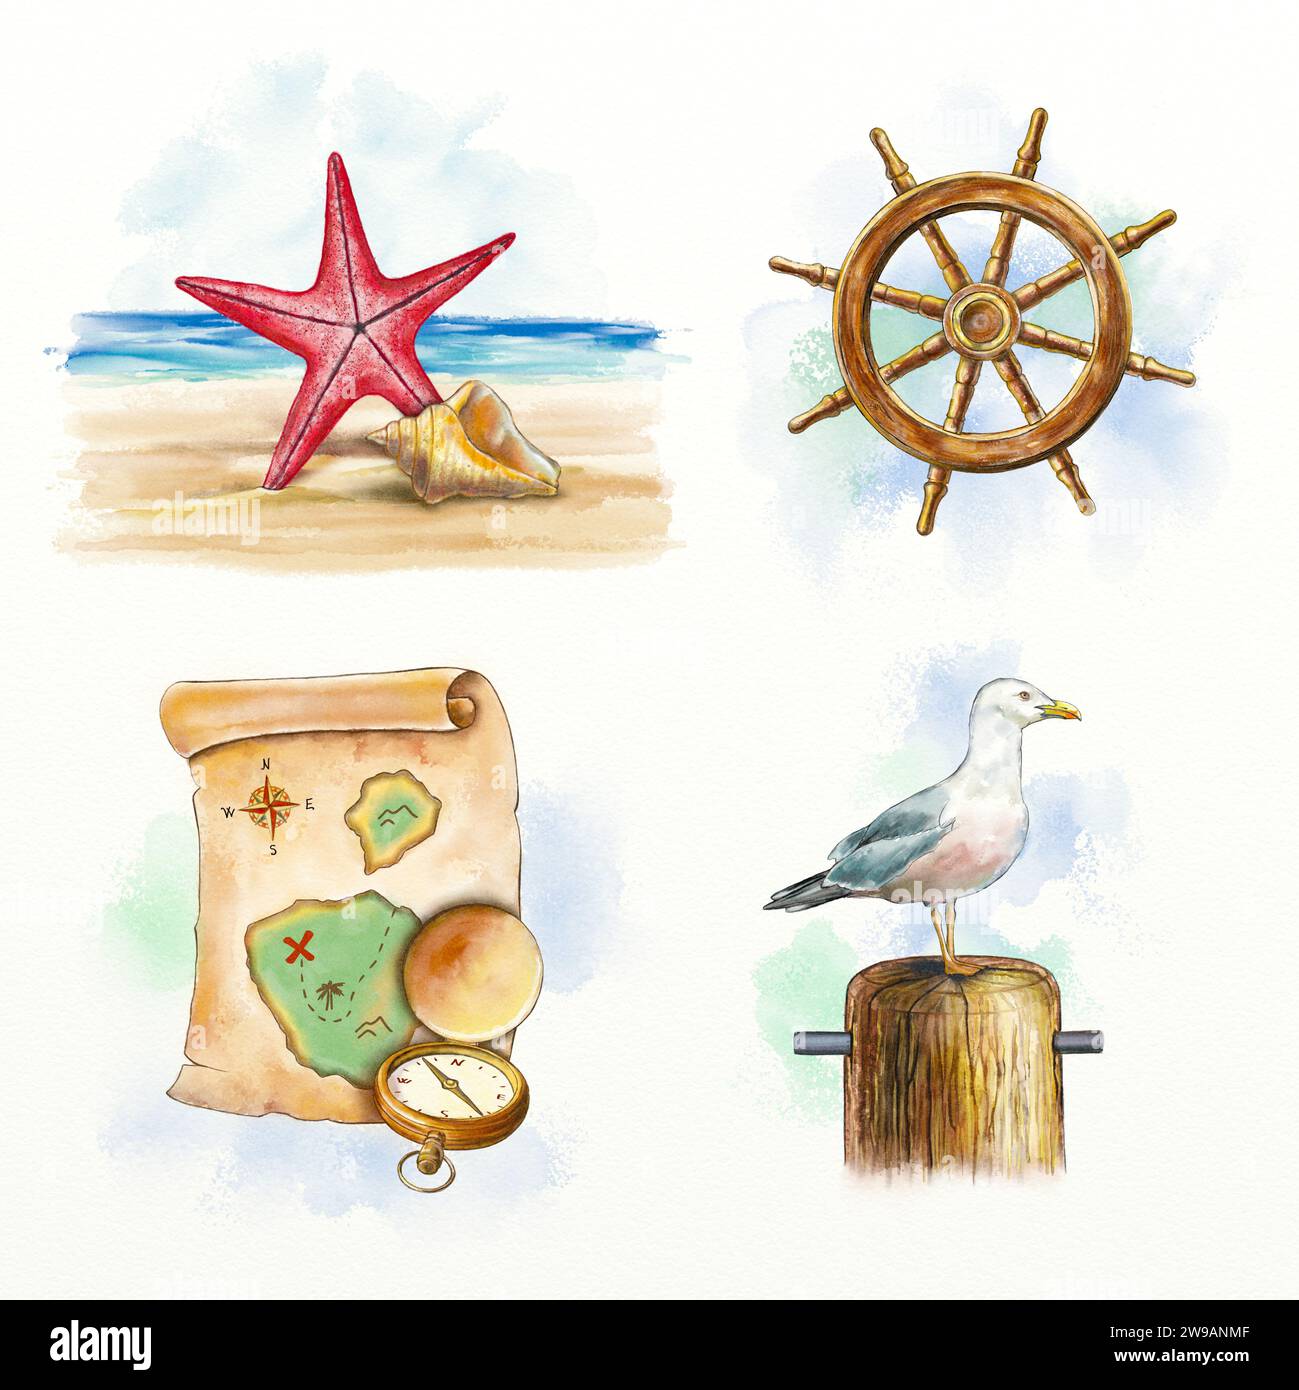 Nautical themed compositions including a starfish, seashell, ship wheel, old map, compass and seagull. Digital watercolor. Stock Photo